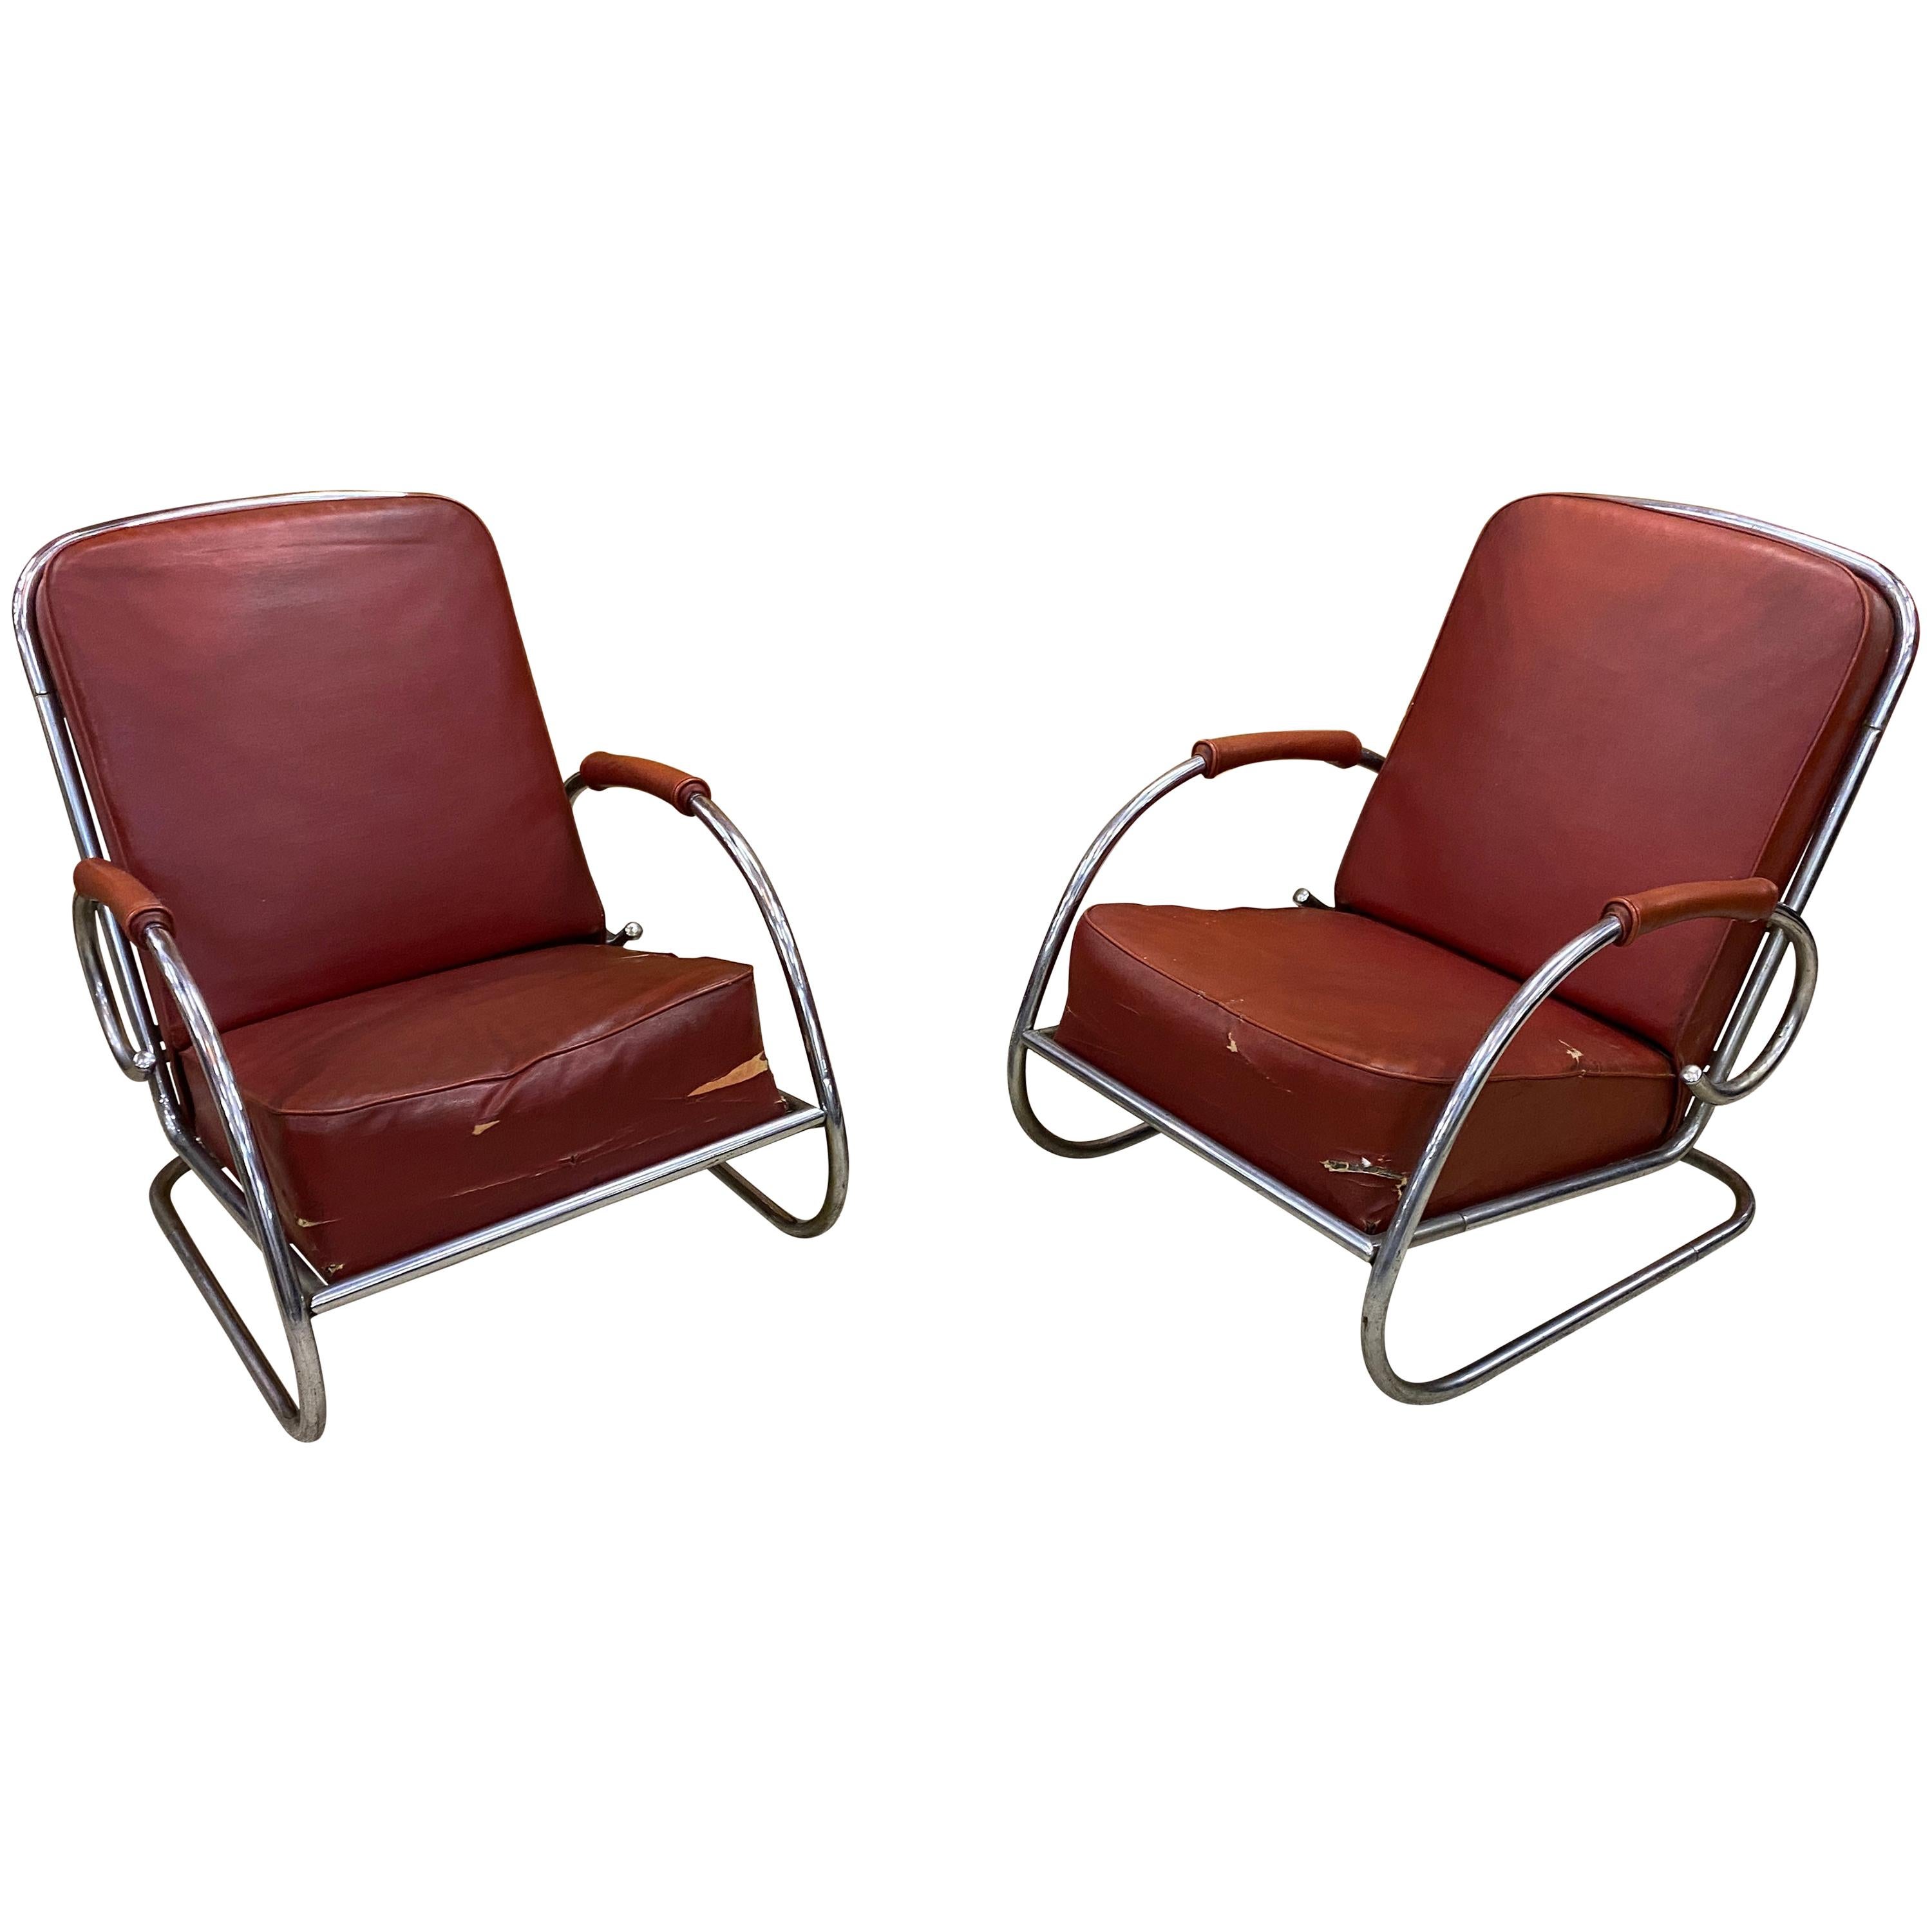 2 Modernist Art Deco Armchairs in Chromed Metal and Faux Leather circa 1920-1930 For Sale